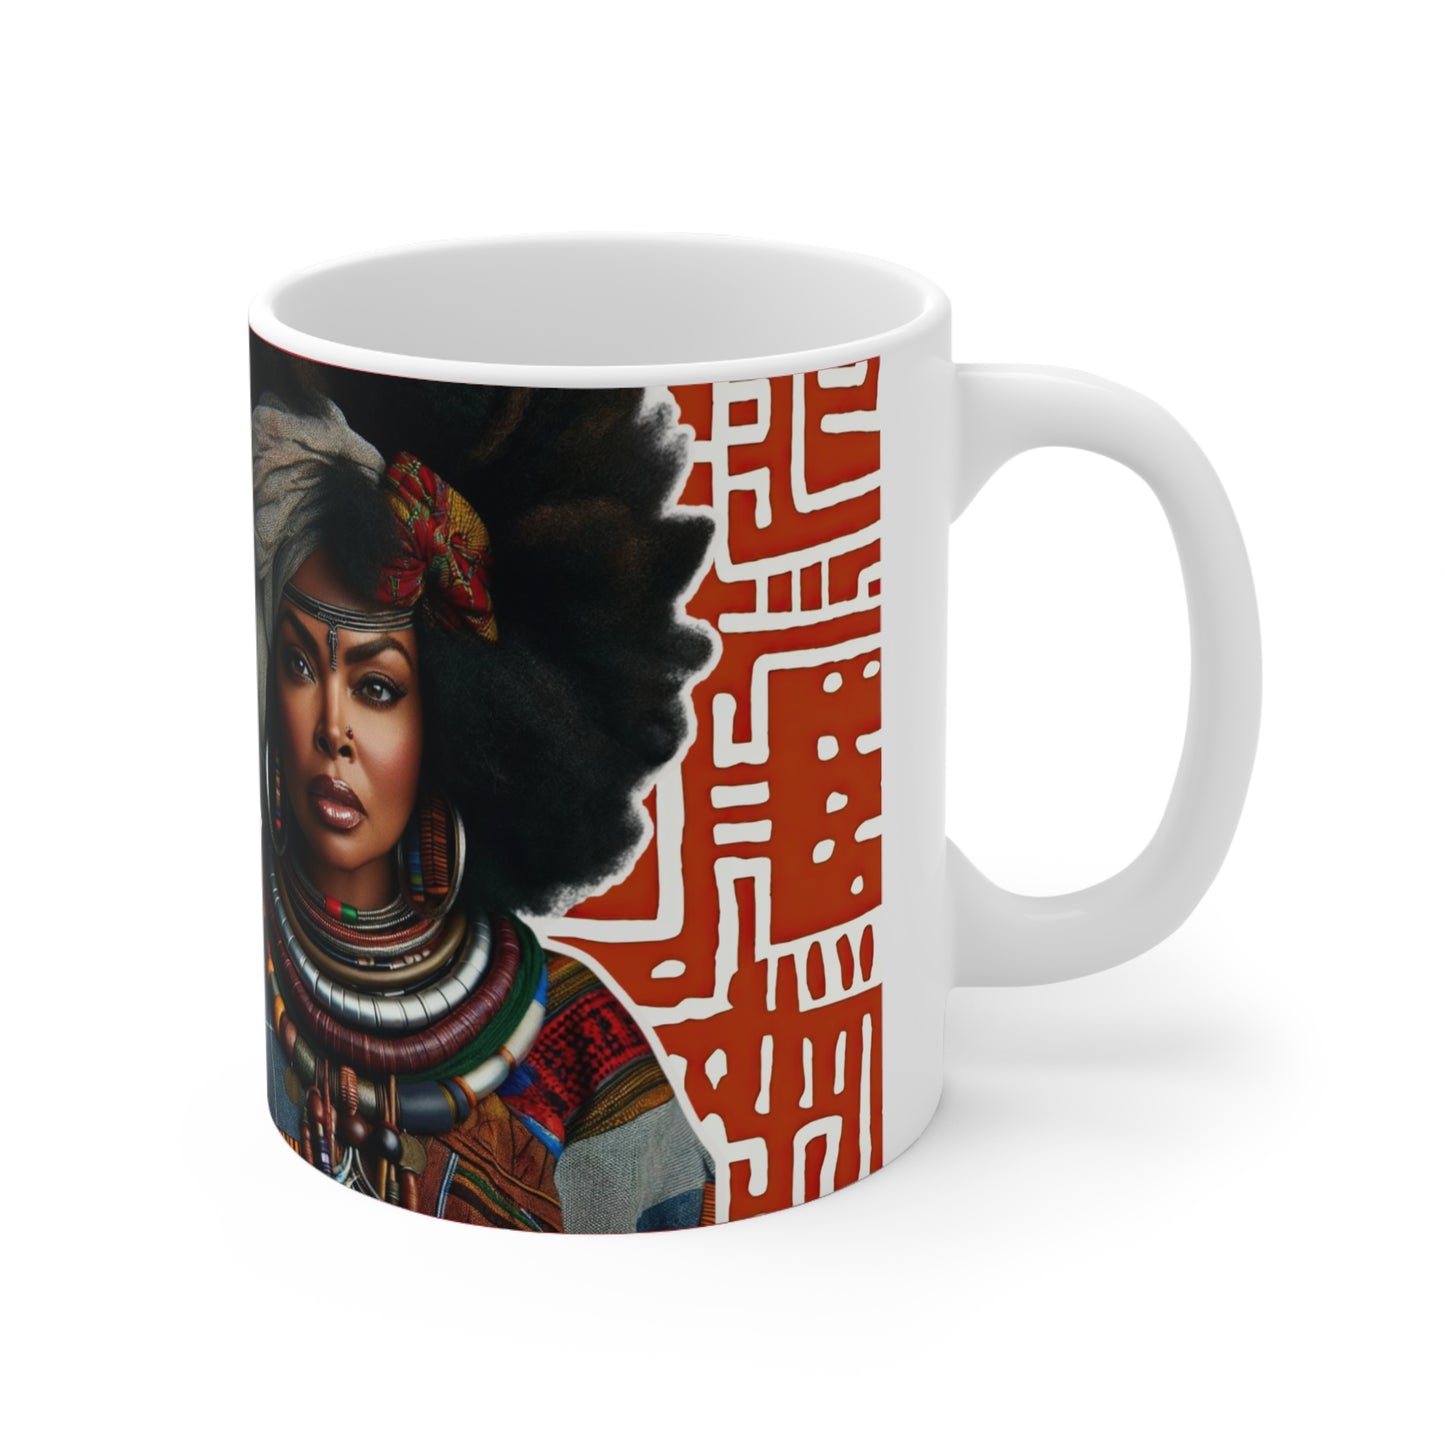 She is BOLD: Inspirational African Queen Mug - Ceramic Coffee Cups, 11oz, 15oz